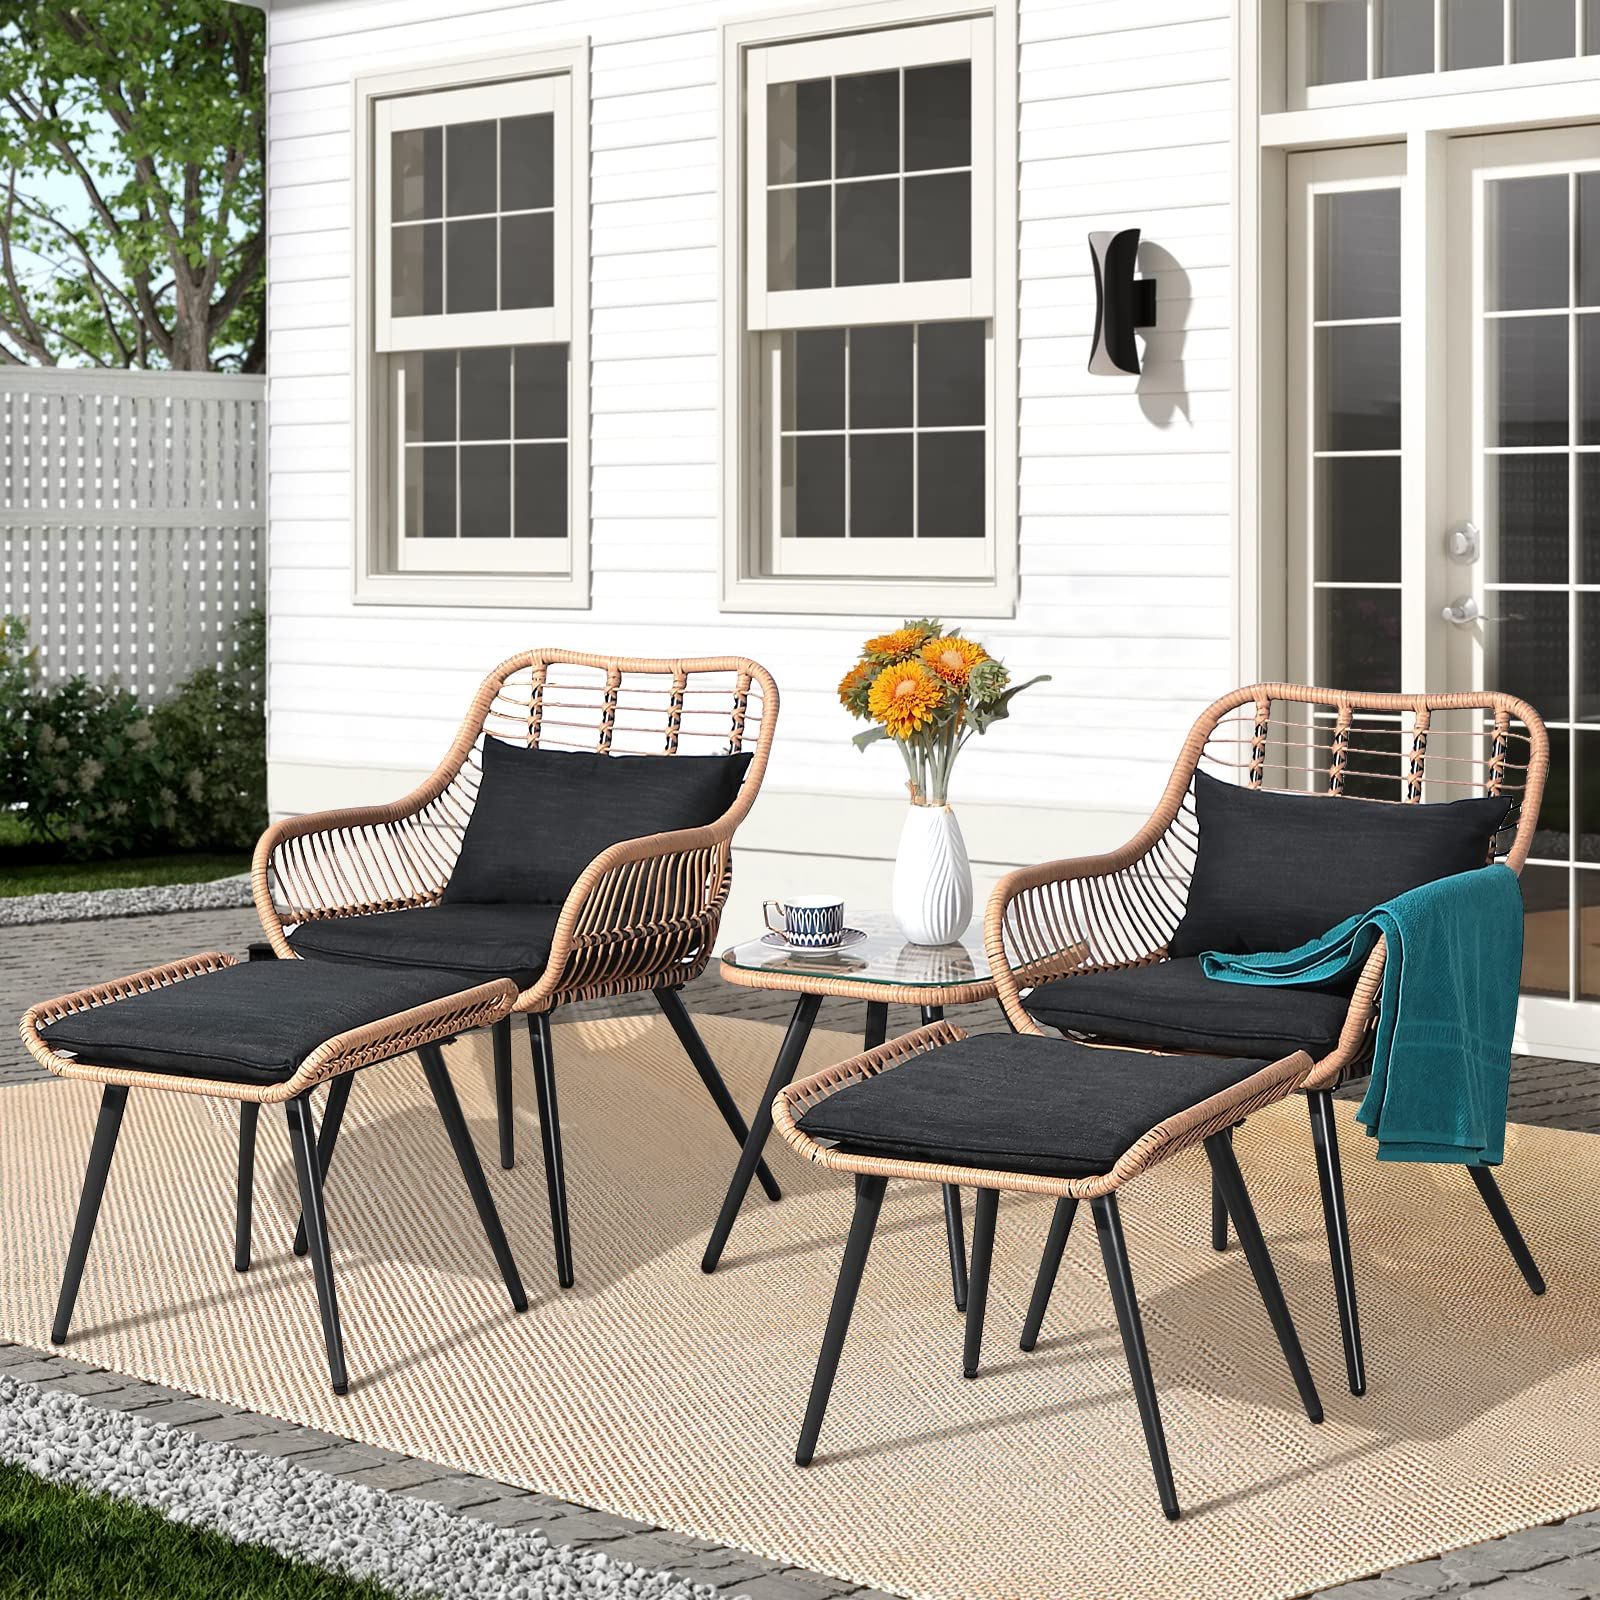 Famous 5 Piece Outdoor Patio Furniture Set Within Amazon: Joivi 5 Piece Outdoor Patio Furniture Set, Pe Rattan Wicker  Small Patio Conversation Set Porch Furniture, Cushioned Patio Chairs With  Ottomans And Side Table : Patio, Lawn & Garden (View 5 of 15)